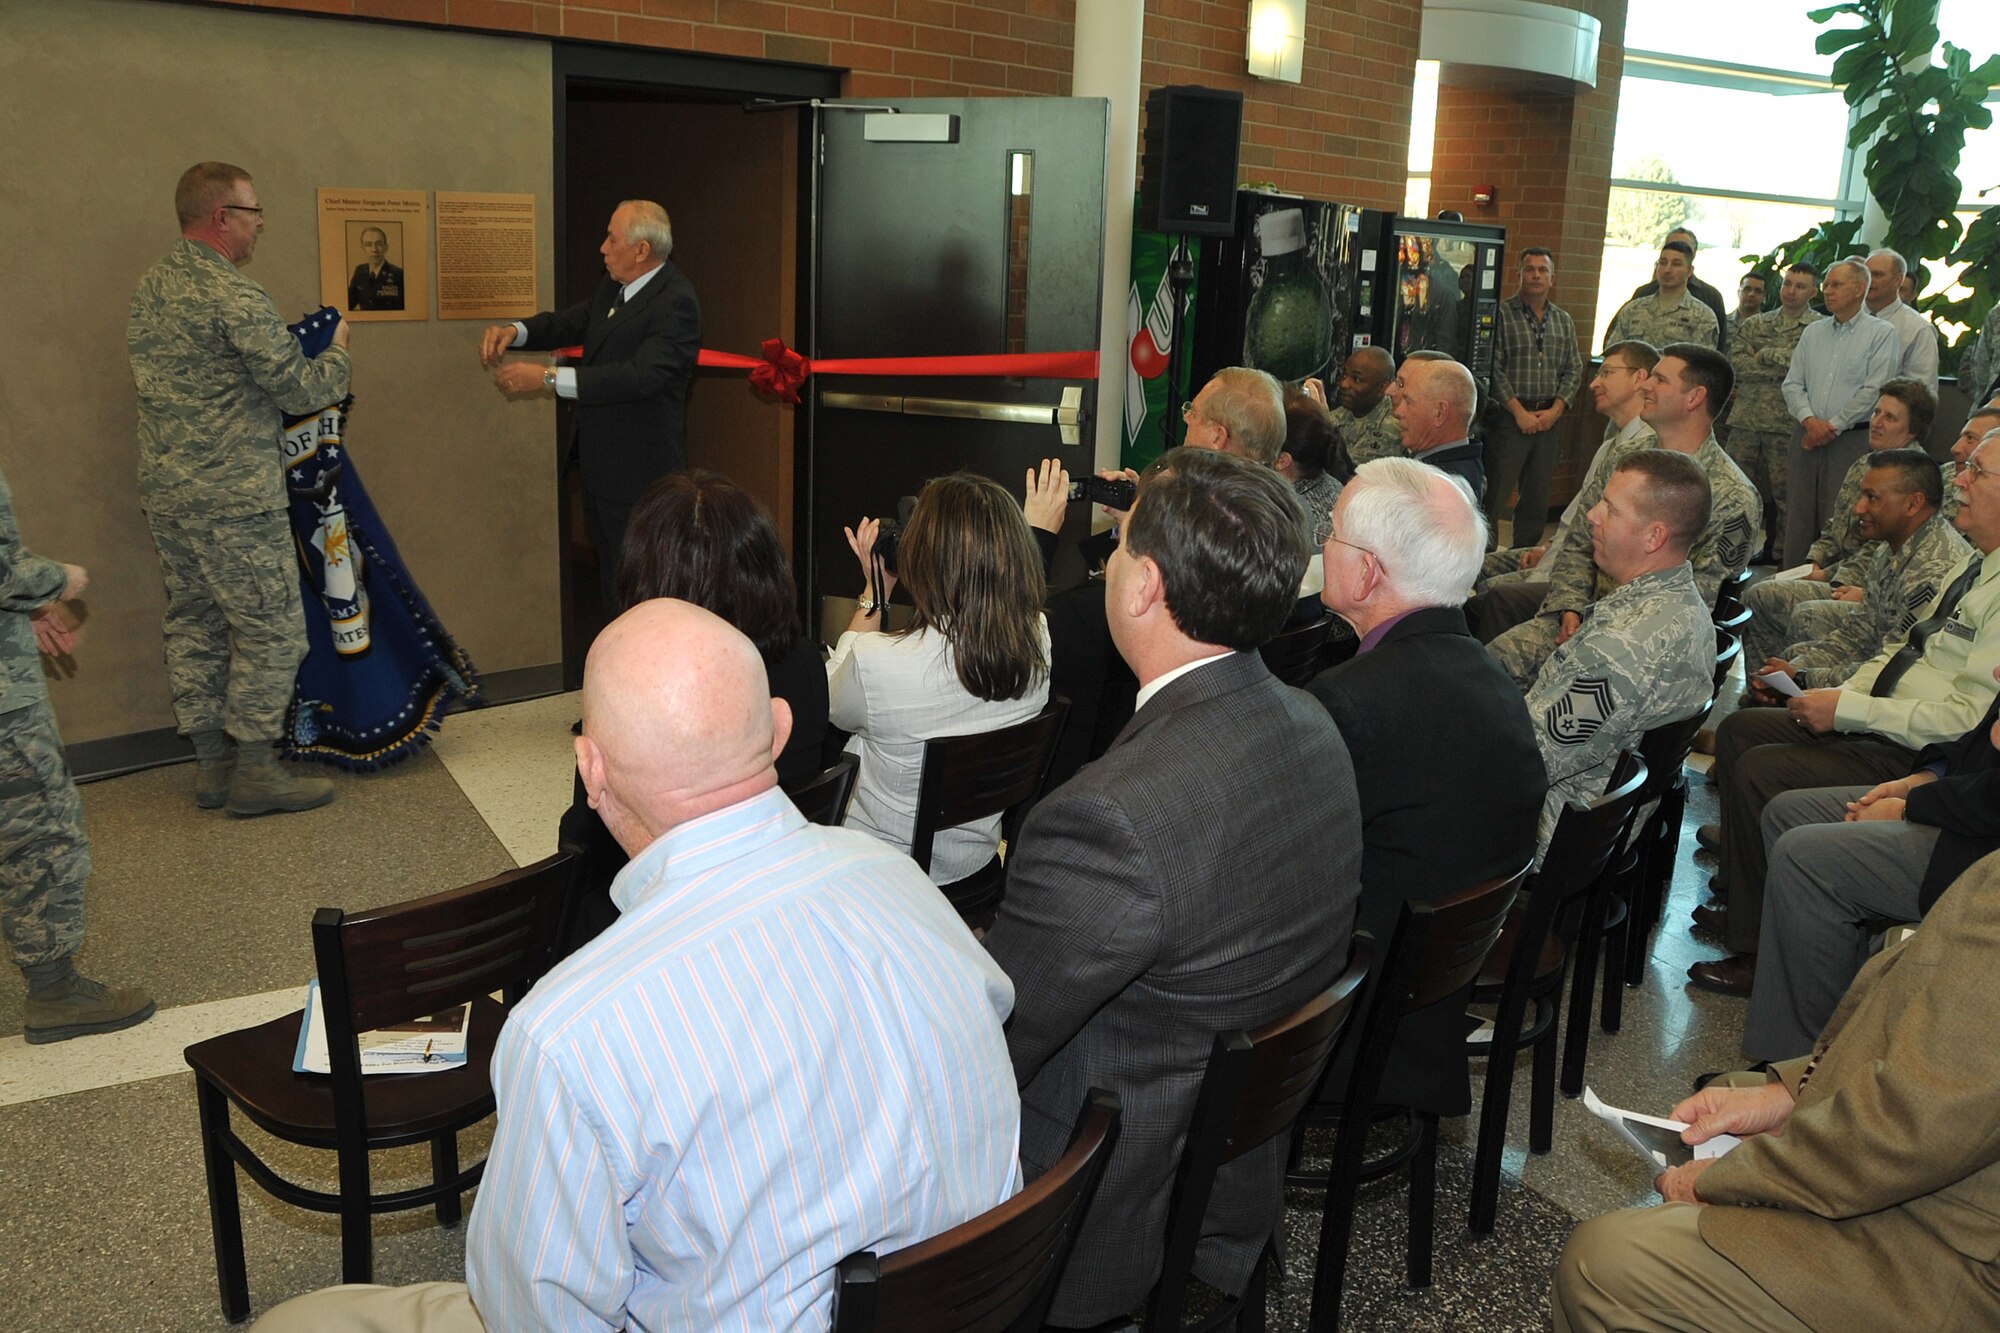 OFFUTT AIR FORCE BASE, Neb. -- Col. Robert Russell, Air Force Weather Agency commander, and Retired Chief Master Sgt. Peter Morris, unveil a plaque dedicating the AFWA auditorium to Chief Morris during a ceremony here Feb. 15. Chief Morris served 30 years in the Air Force and is widely recognized as one of their finest enlisted leaders and weather warriors. (Air Force photo by Jeff W. Gates)